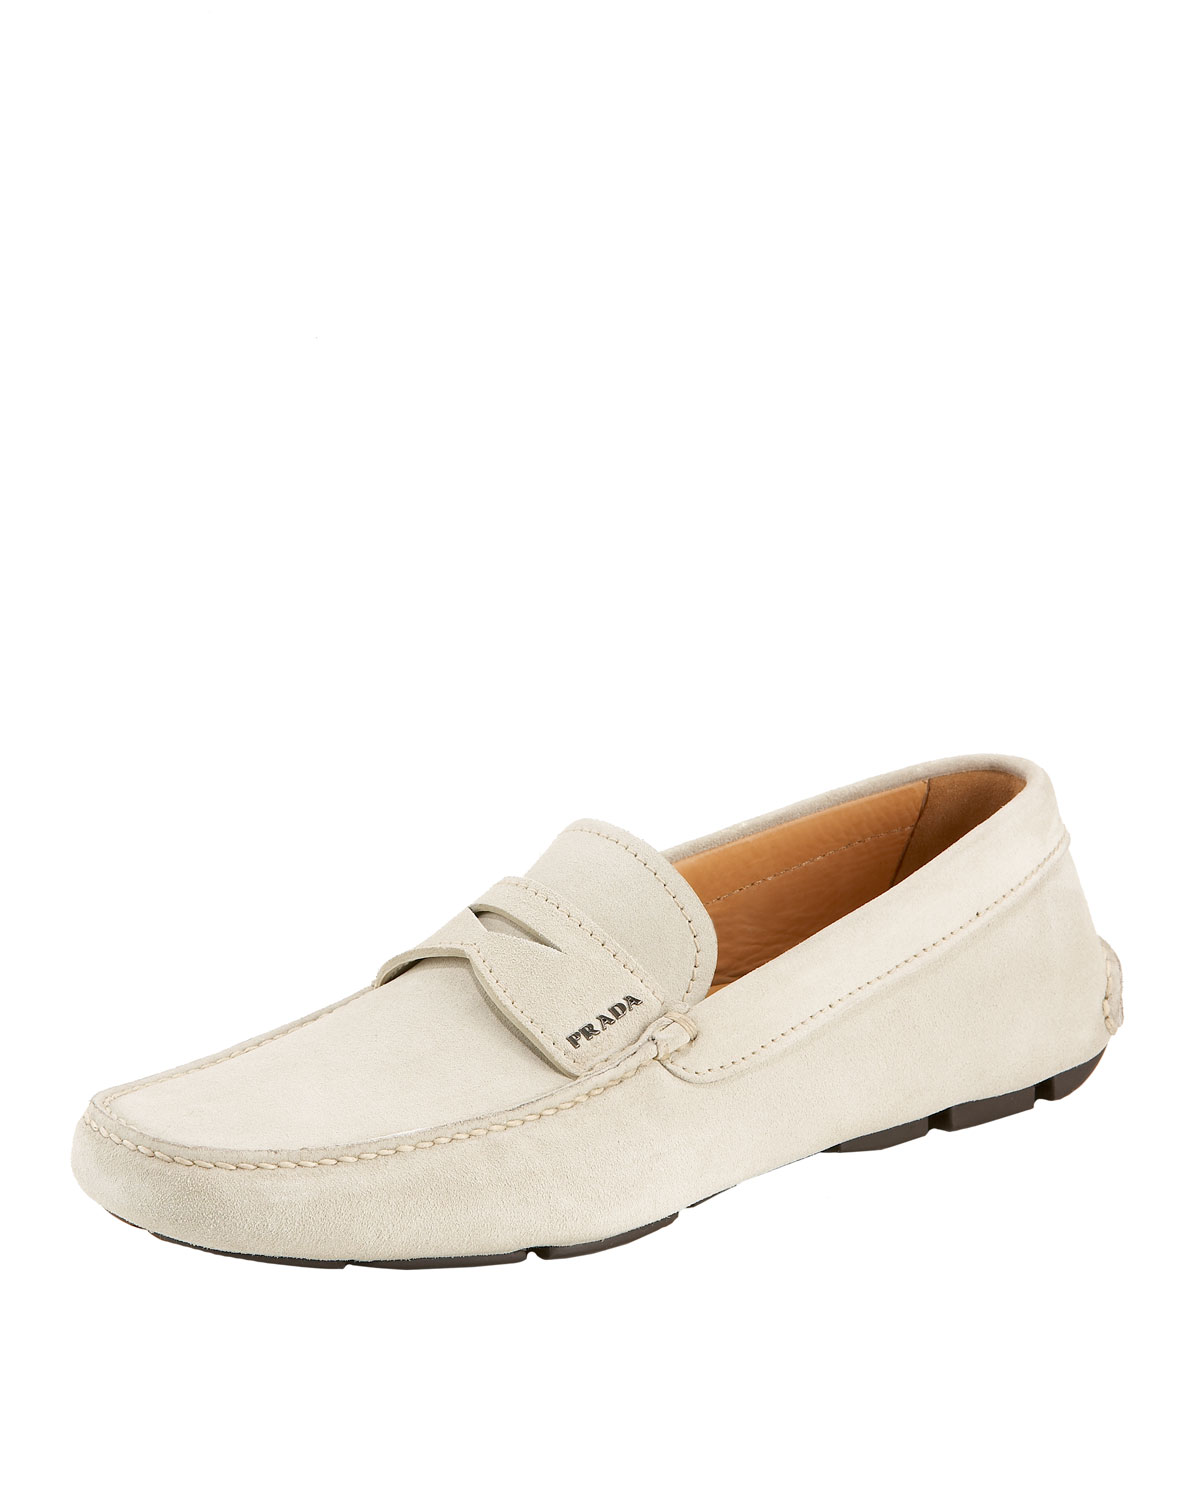 Prada Suede Driving Shoe, Ivory in White (ivory) | Lyst